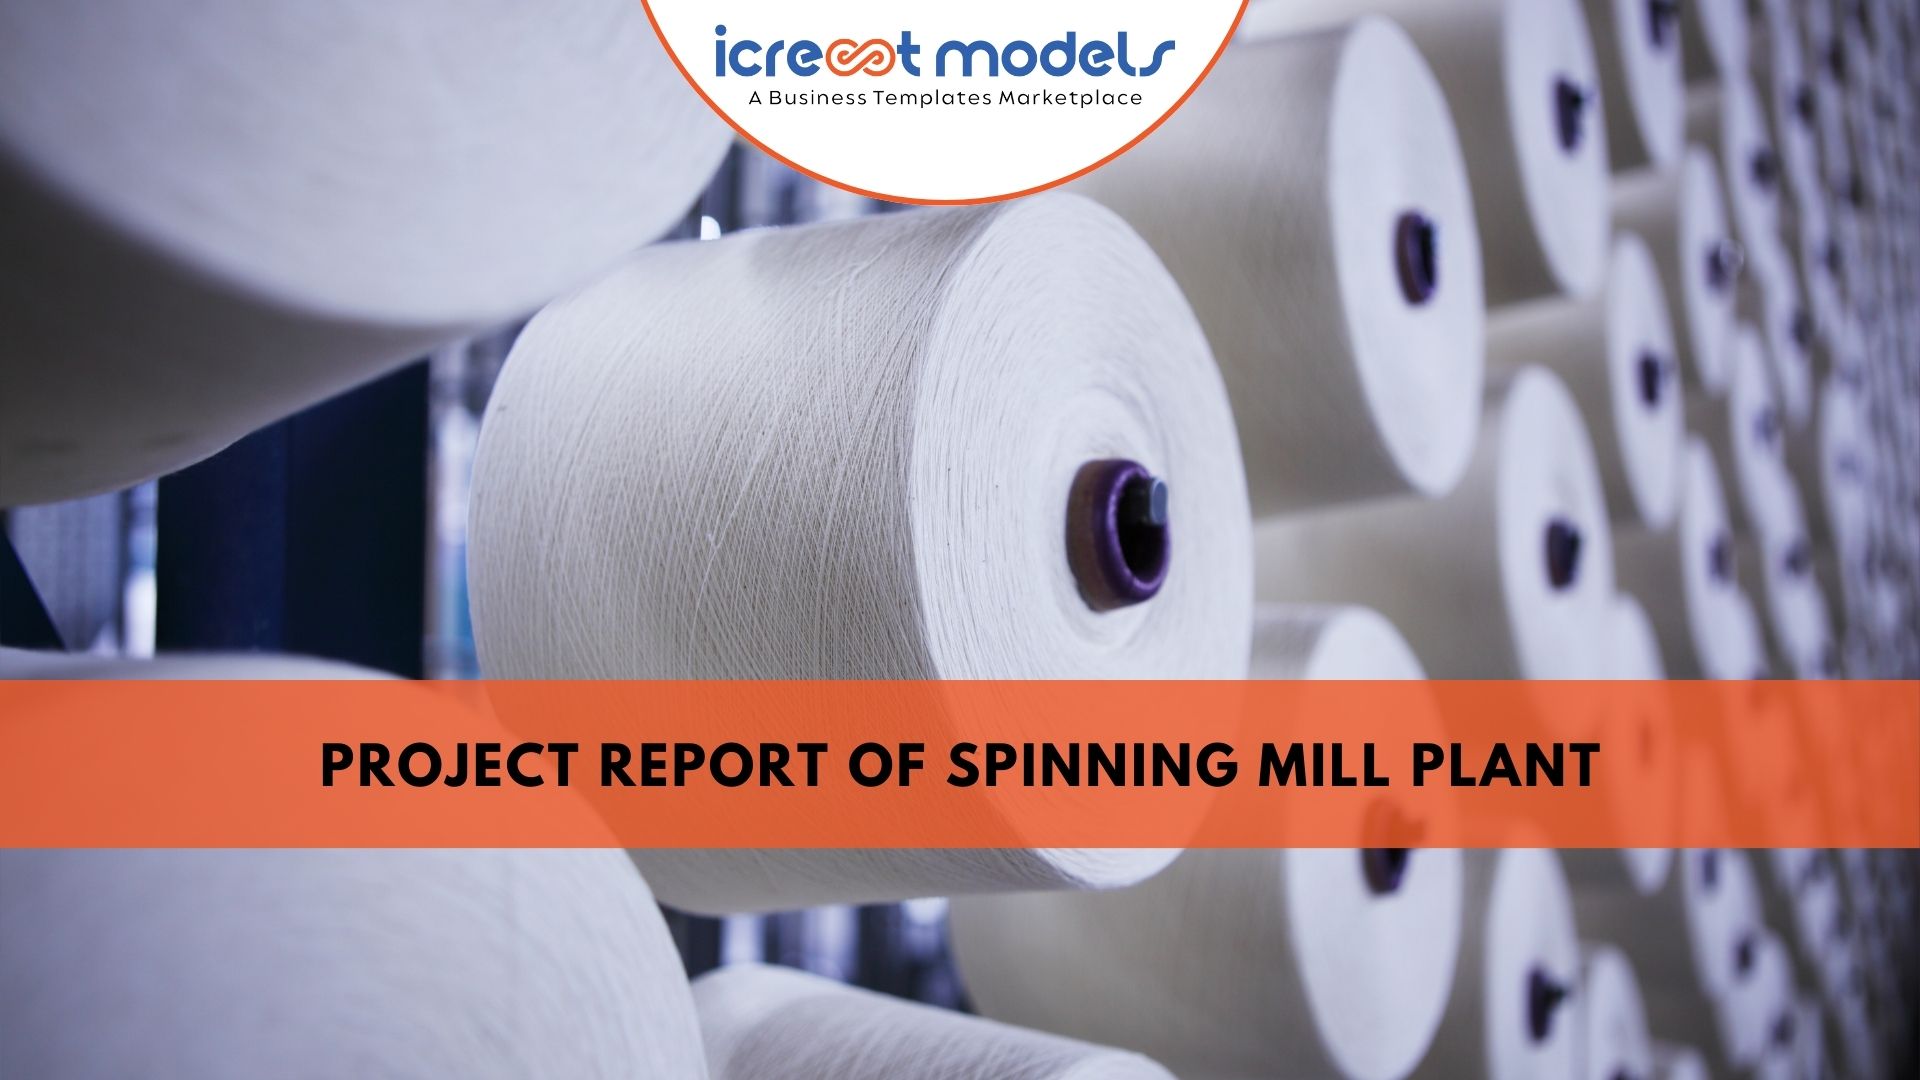 PROJECT REPORT OF SPINNING MILL PLANT